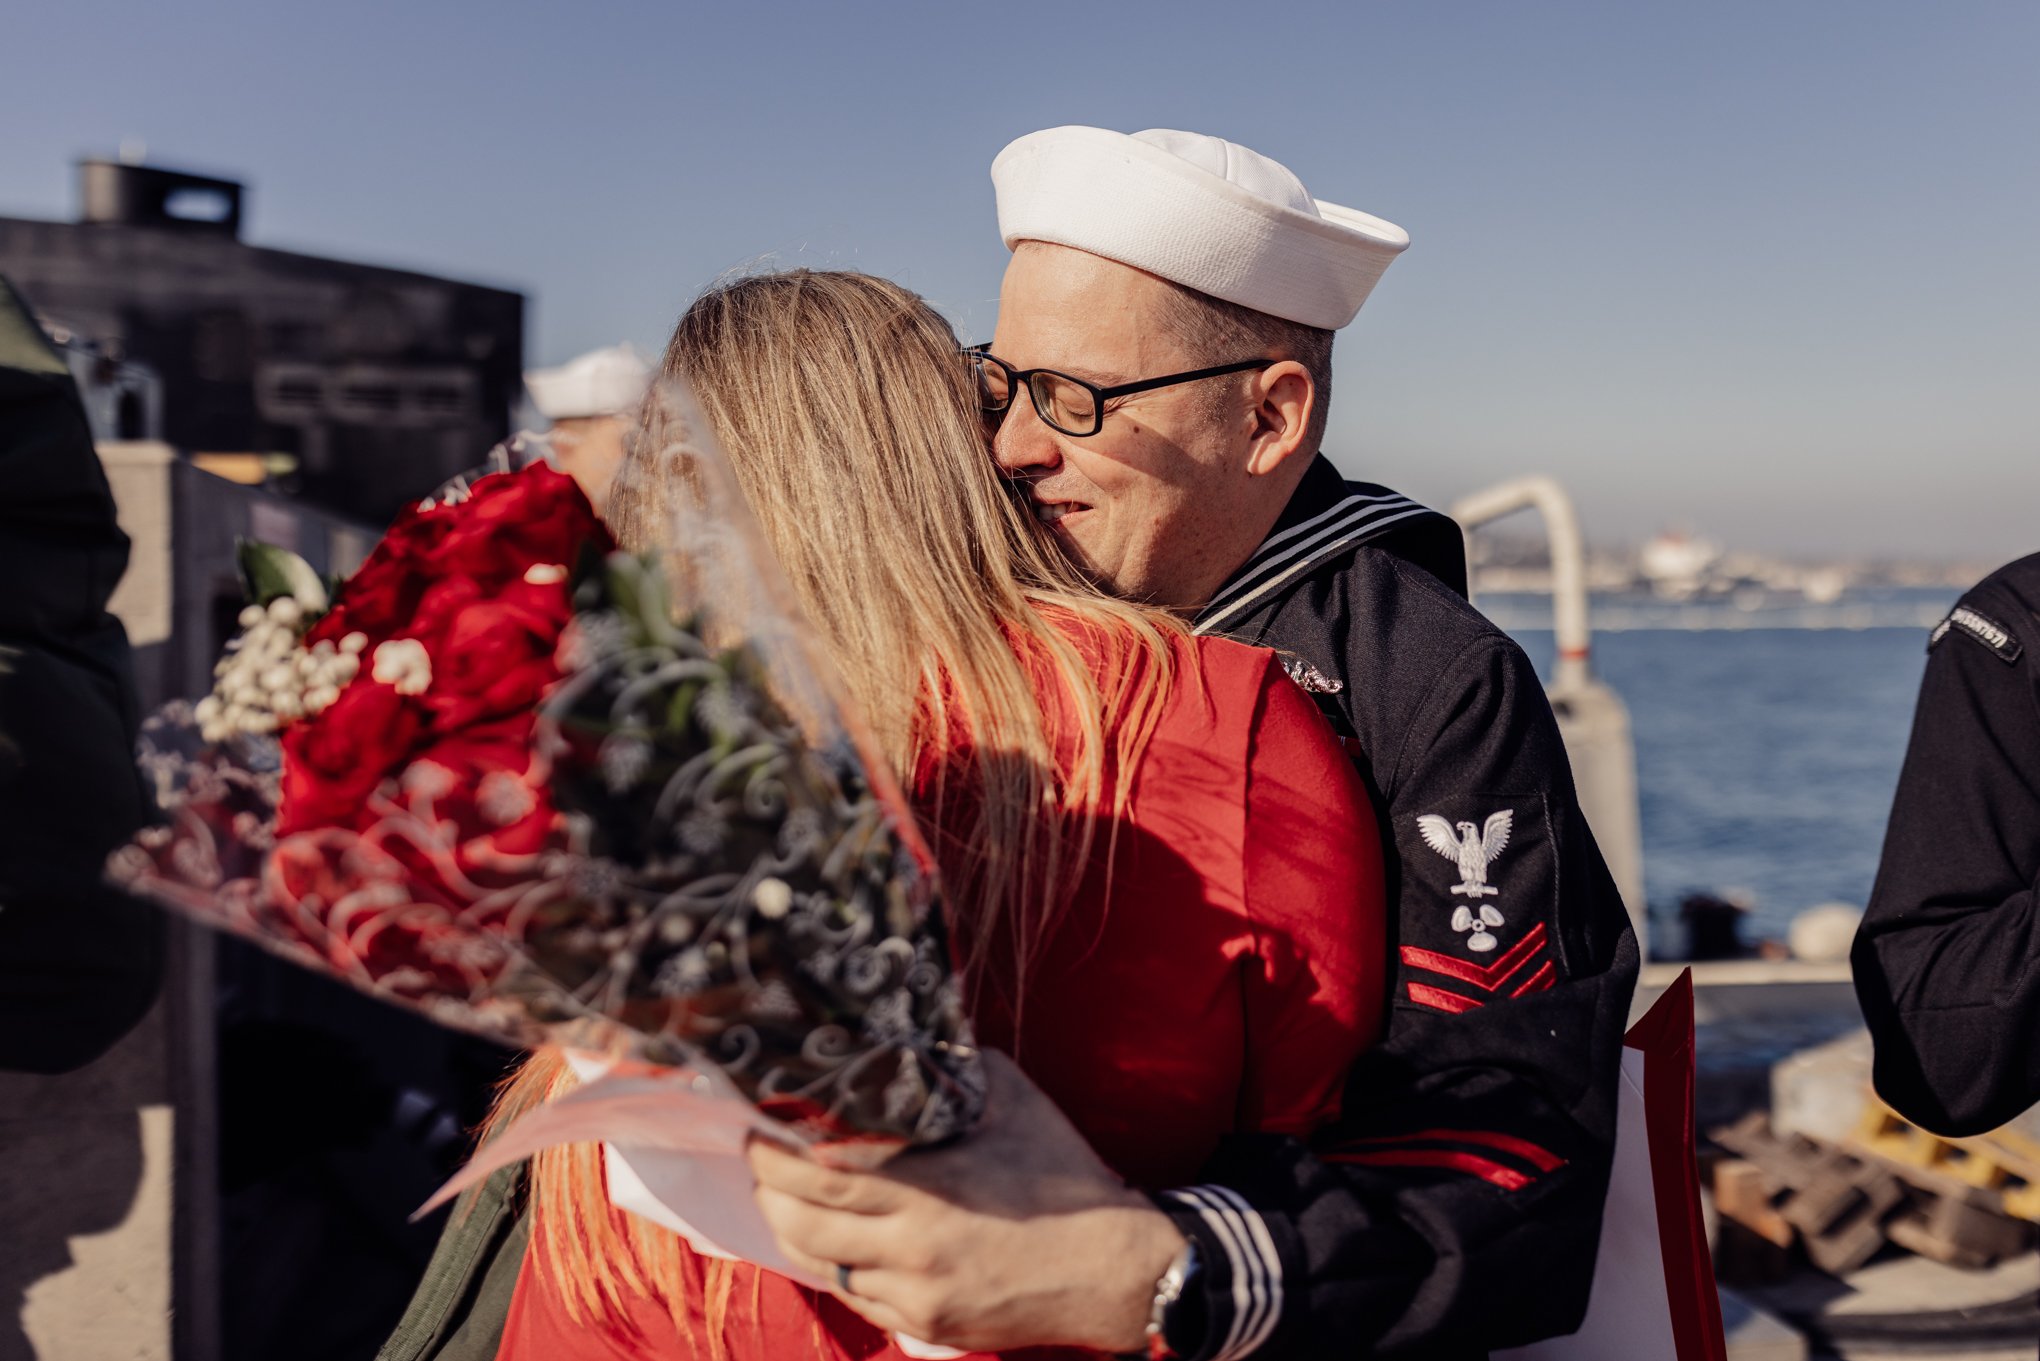 Sailor hugging wife for the first time in months after long navy deployment 